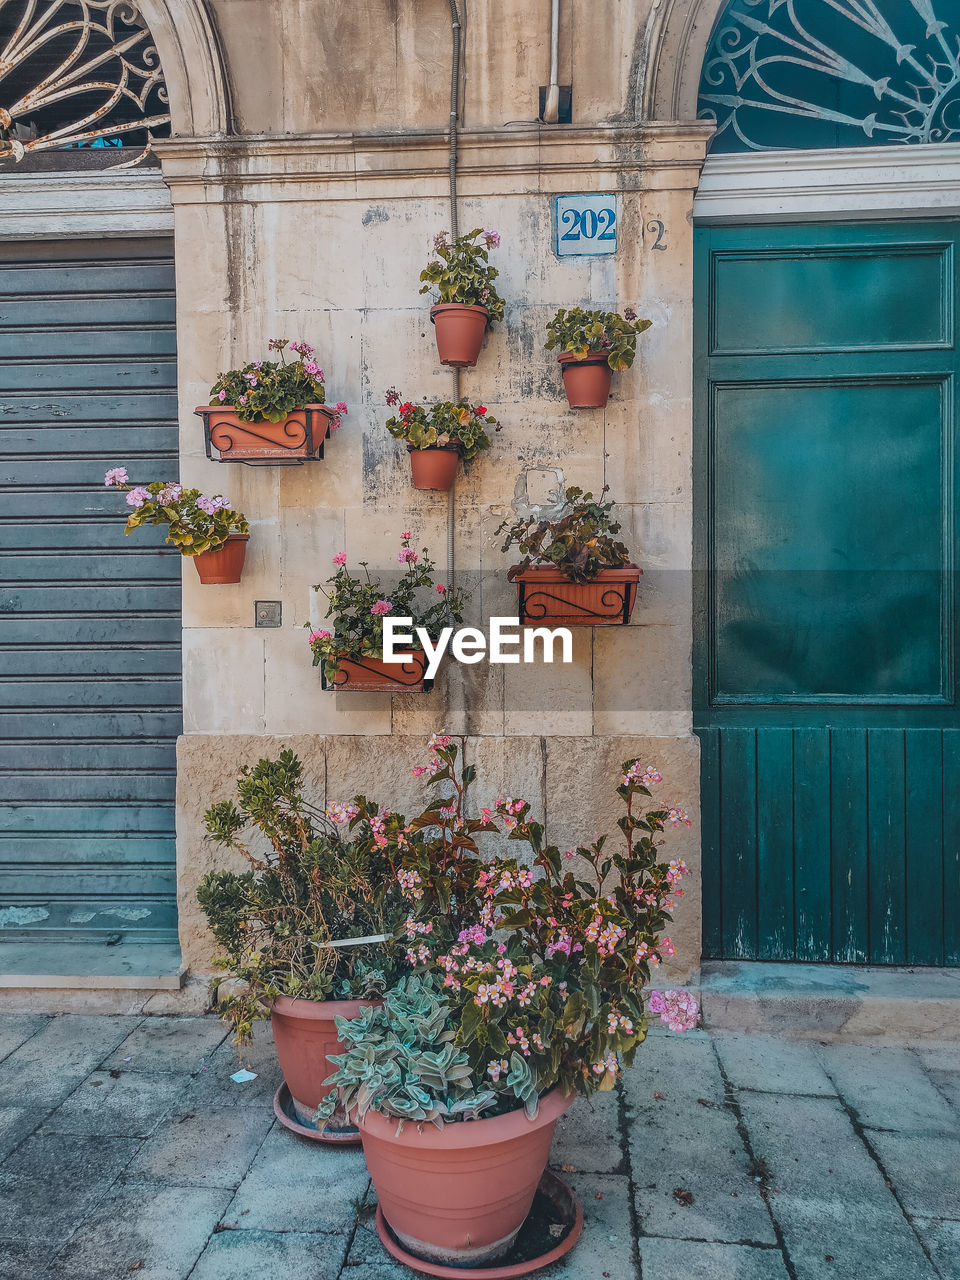 architecture, building exterior, plant, built structure, potted plant, door, entrance, flowering plant, flower, wall, no people, building, day, blue, nature, flowerpot, window, outdoors, closed, house, wall - building feature, growth, city, facade, wood, residential district, decoration, urban area